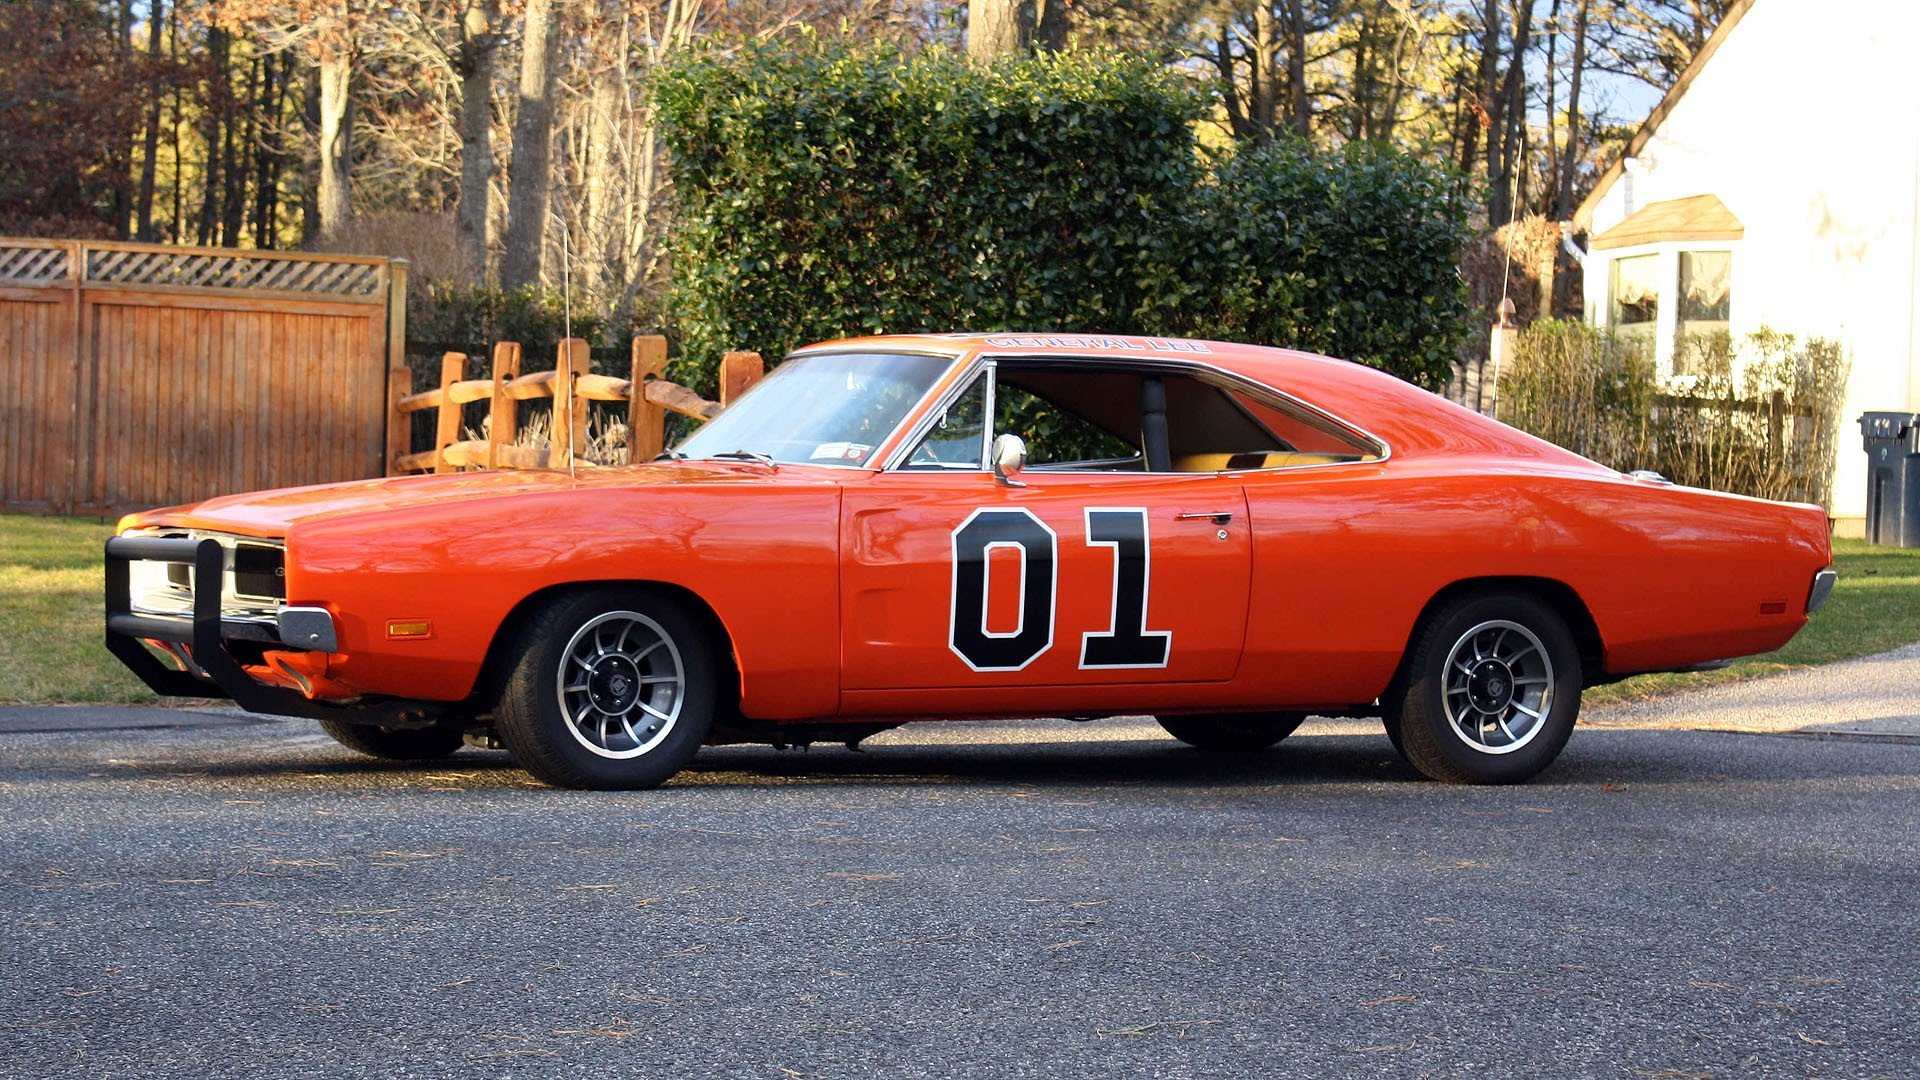  of Hazzard General Lee classic cars widescreen wallpaper background